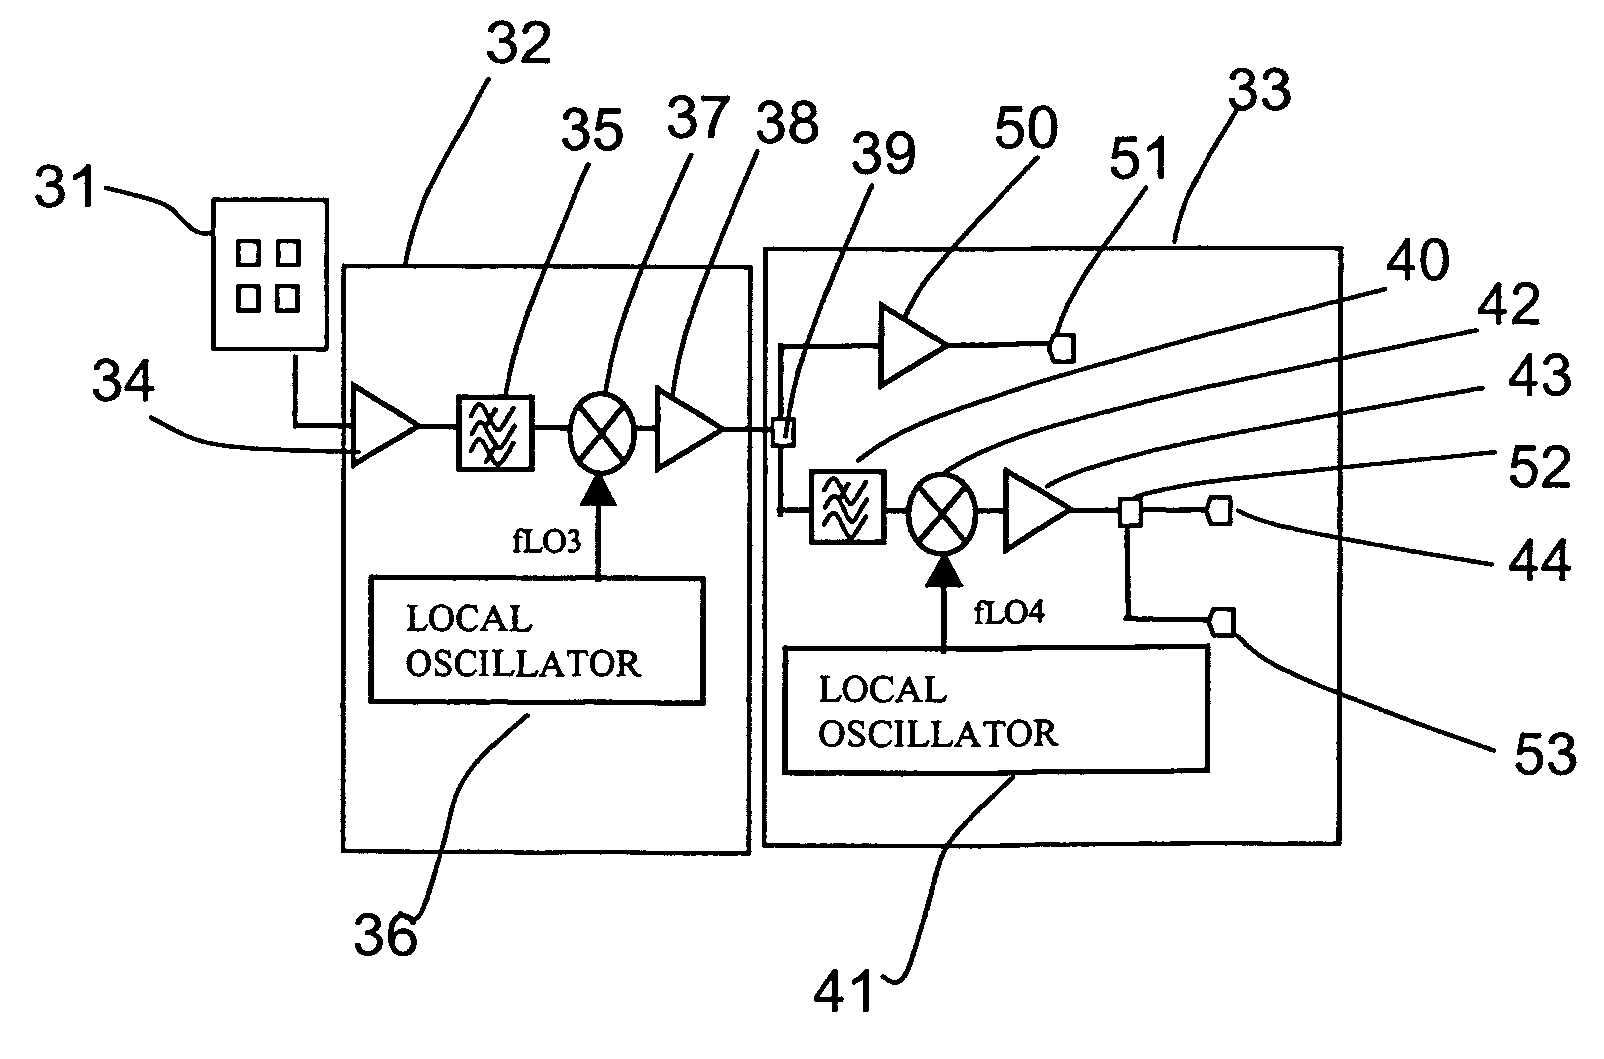 Millimeter wave band transmitter, millimeter wave band receiver and millimeter wave band communication apparatus carrying out radio communication in millimeter wave band region